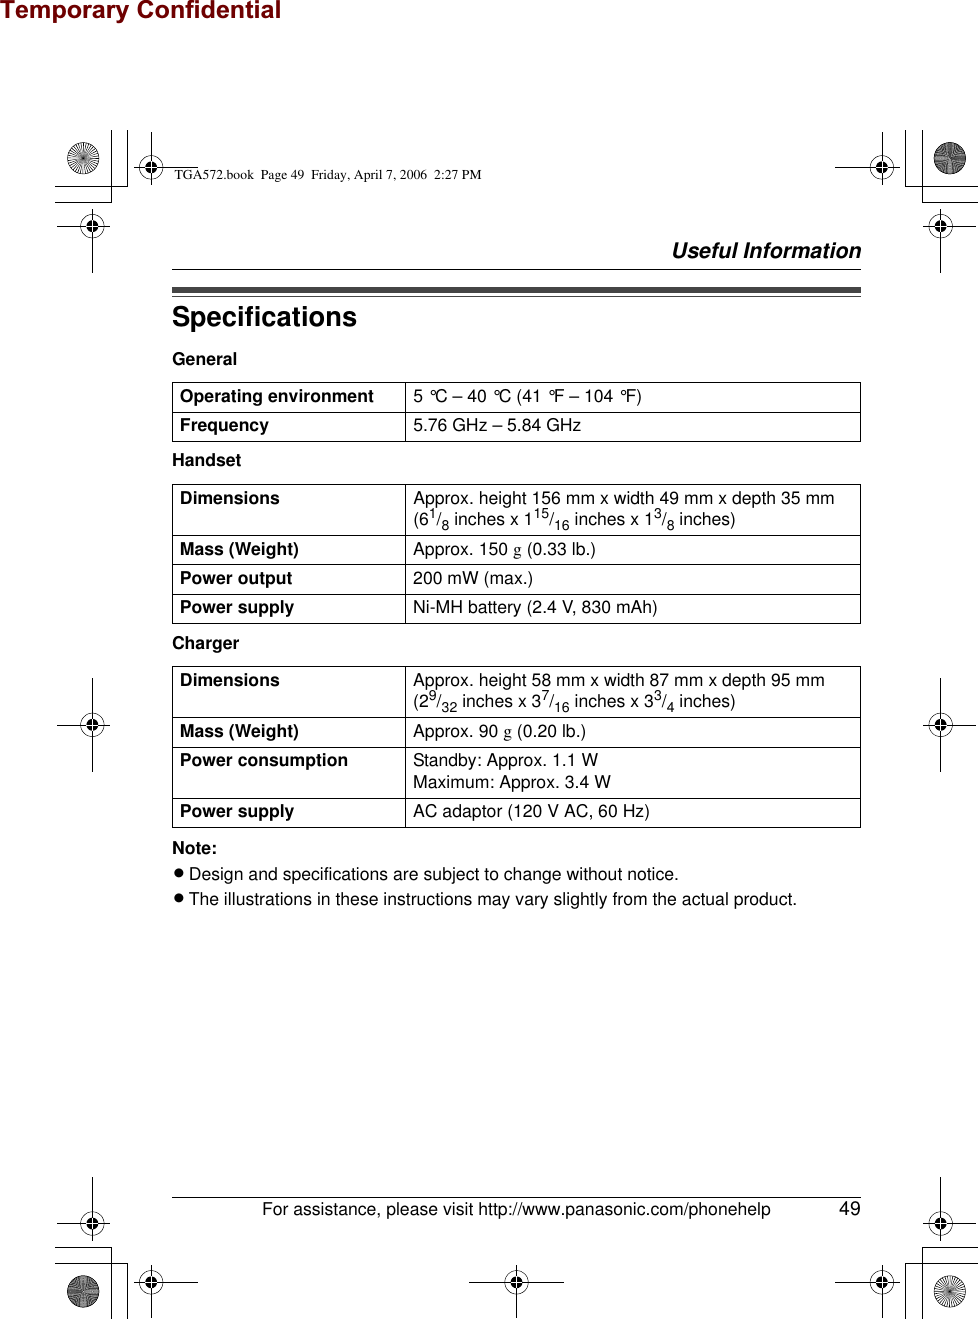 Temporary ConfidentialUseful InformationFor assistance, please visit http://www.panasonic.com/phonehelp 49SpecificationsGeneralHandsetChargerNote:LDesign and specifications are subject to change without notice.LThe illustrations in these instructions may vary slightly from the actual product.Operating environment 5 °C – 40 °C (41 °F – 104 °F)Frequency 5.76 GHz – 5.84 GHzDimensions Approx. height 156 mm x width 49 mm x depth 35 mm(61/8 inches x 115/16 inches x 13/8 inches)Mass (Weight) Approx. 150 g (0.33 lb.)Power output 200 mW (max.)Power supply Ni-MH battery (2.4 V, 830 mAh)Dimensions Approx. height 58 mm x width 87 mm x depth 95 mm(29/32 inches x 37/16 inches x 33/4 inches)Mass (Weight) Approx. 90 g (0.20 lb.)Power consumption Standby: Approx. 1.1 WMaximum: Approx. 3.4 WPower supply AC adaptor (120 V AC, 60 Hz)TGA572.book  Page 49  Friday, April 7, 2006  2:27 PM